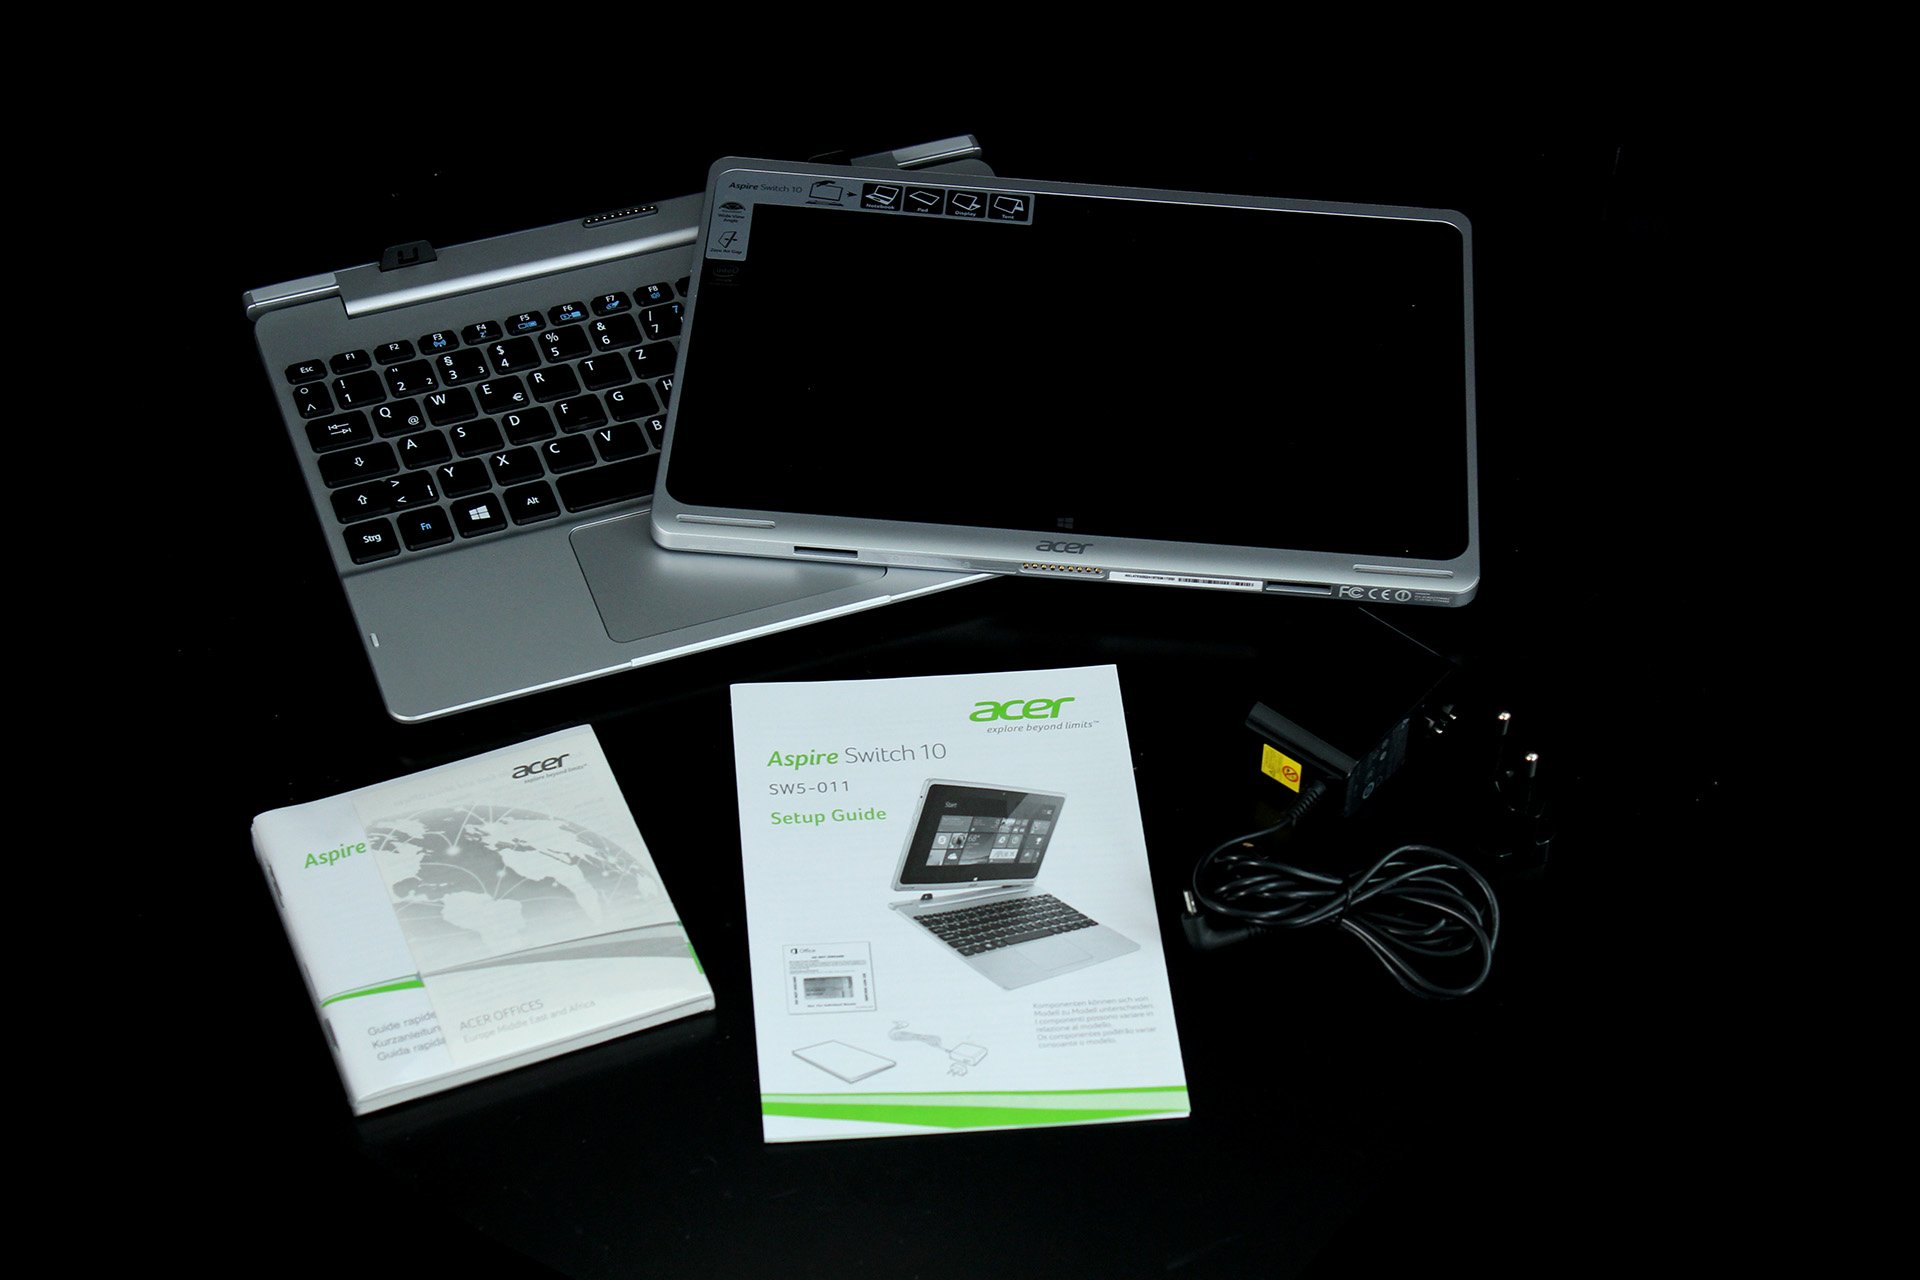 Acer Aspire Switch 10 - Lieferumfang